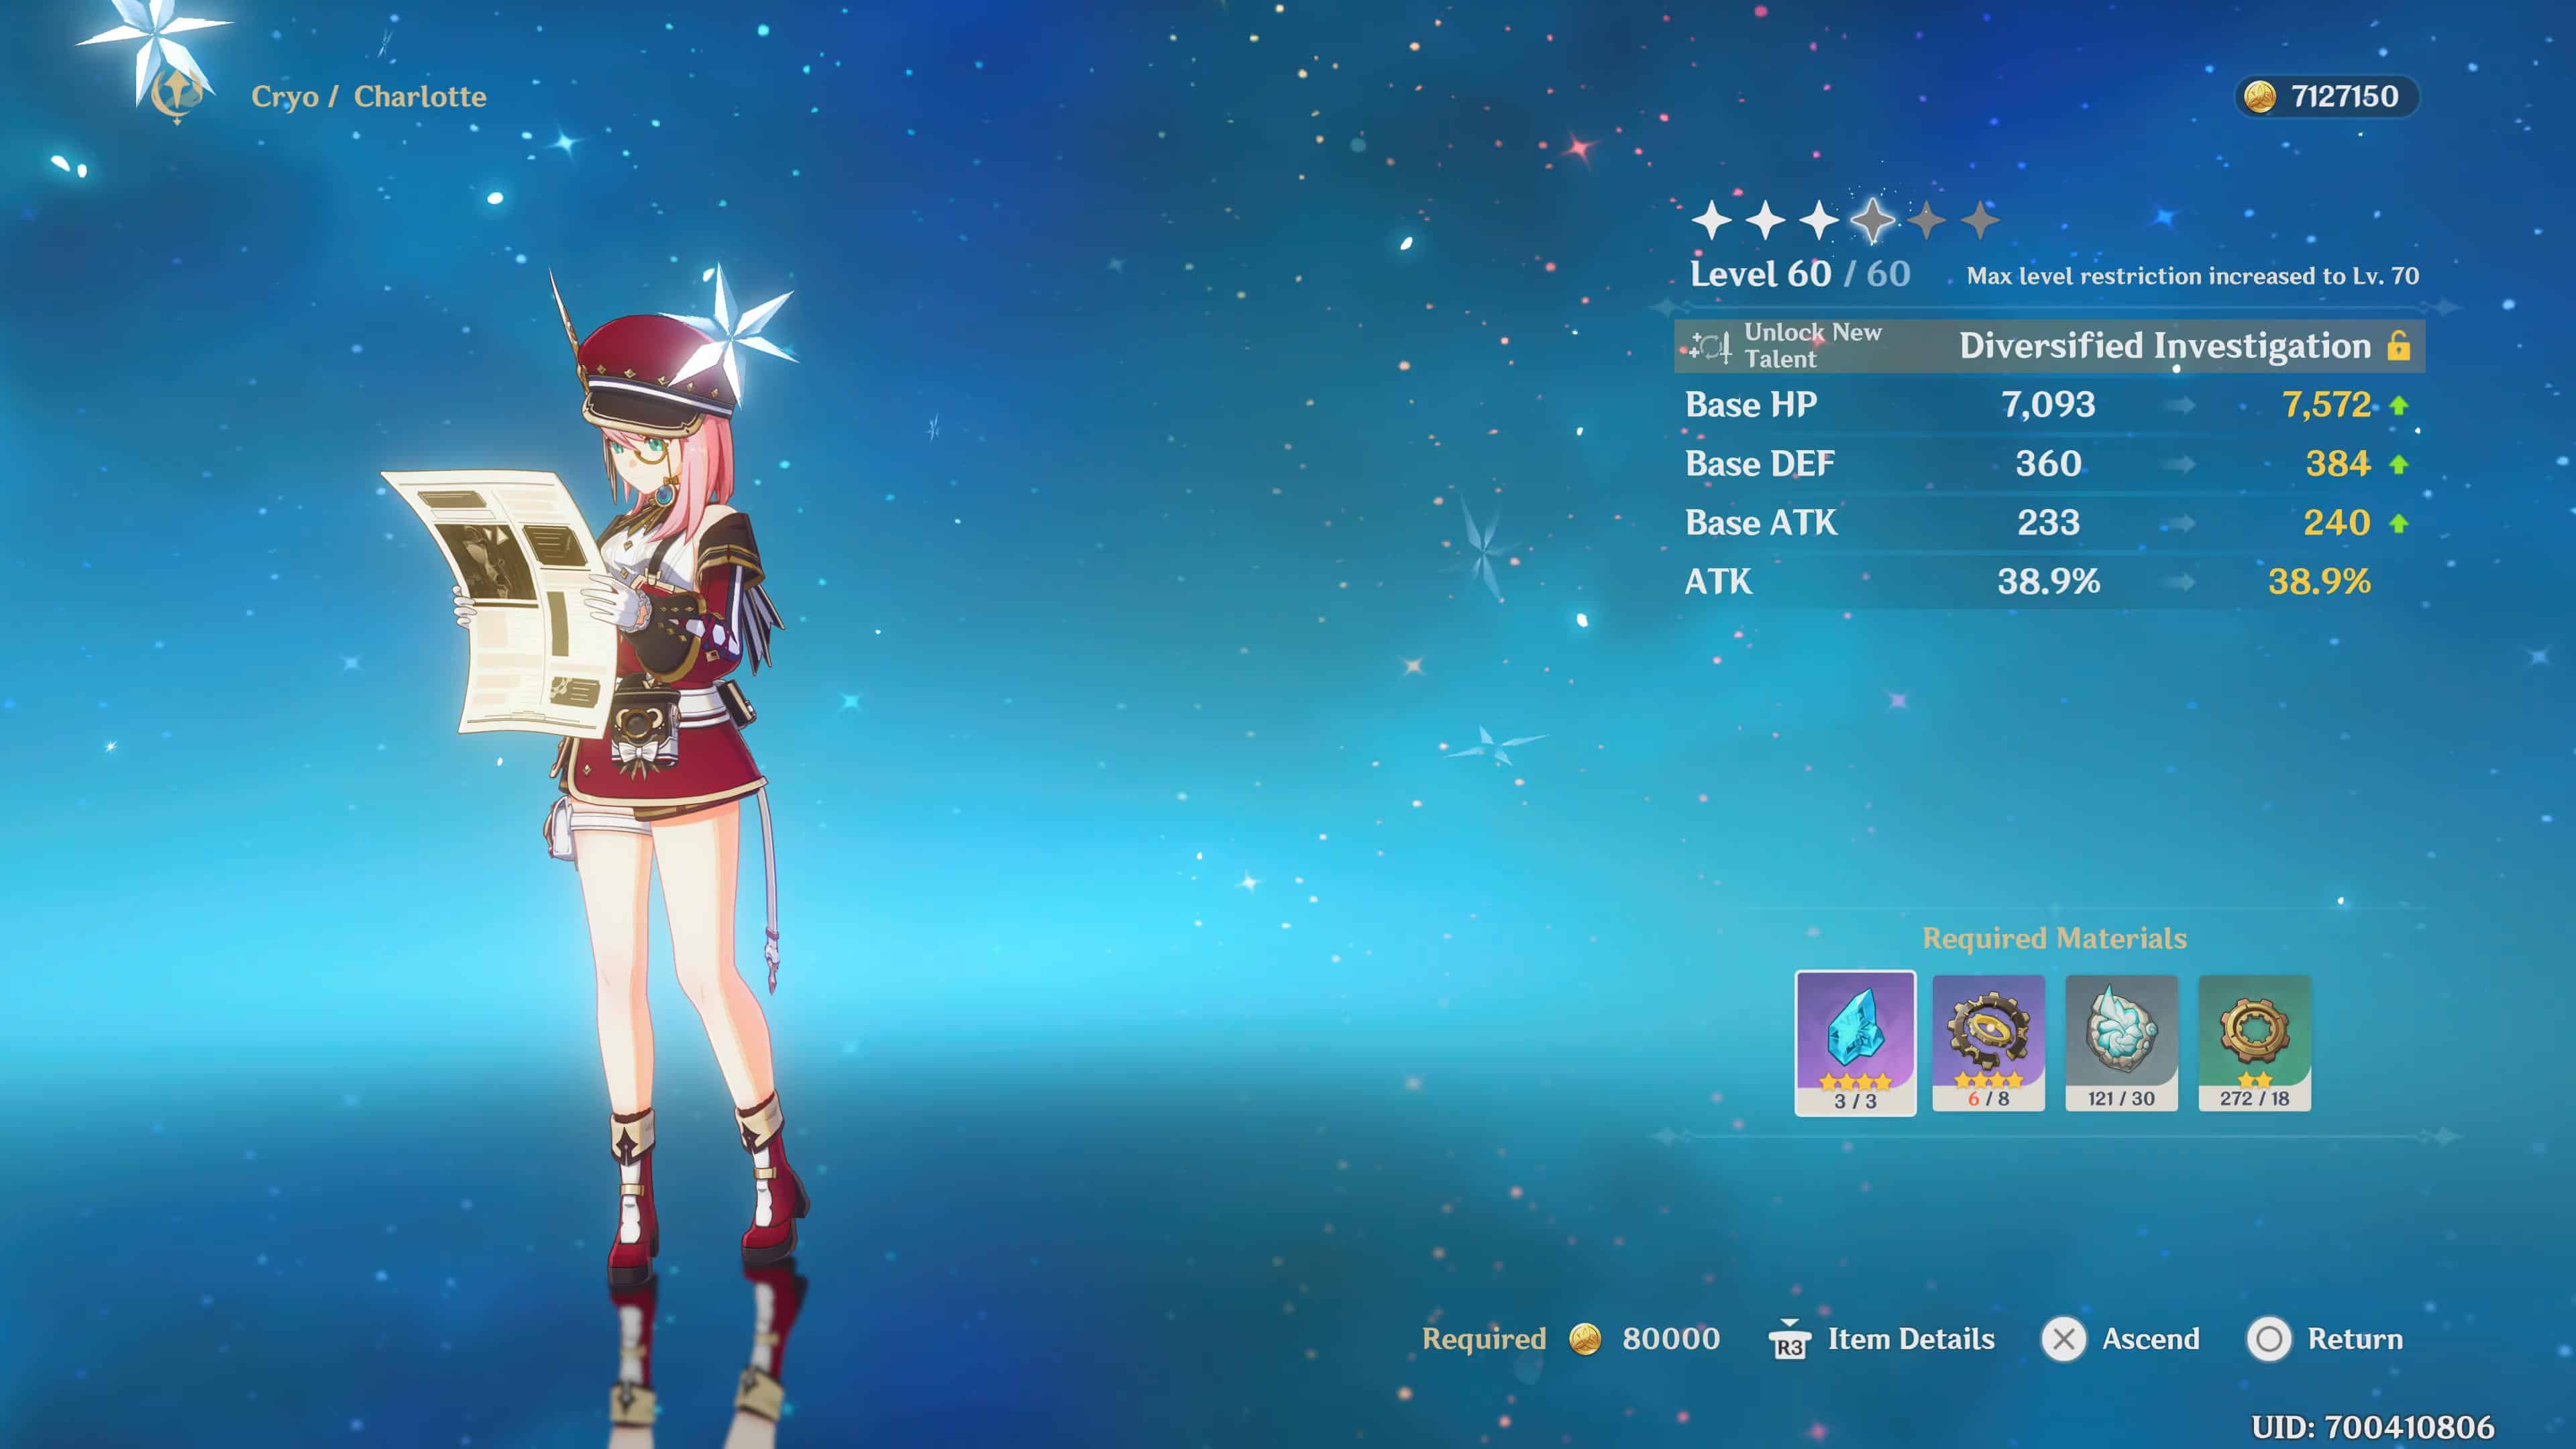 A screenshot of a character, Charlotte, in the game Genshin Impact showing her Ascension screen.